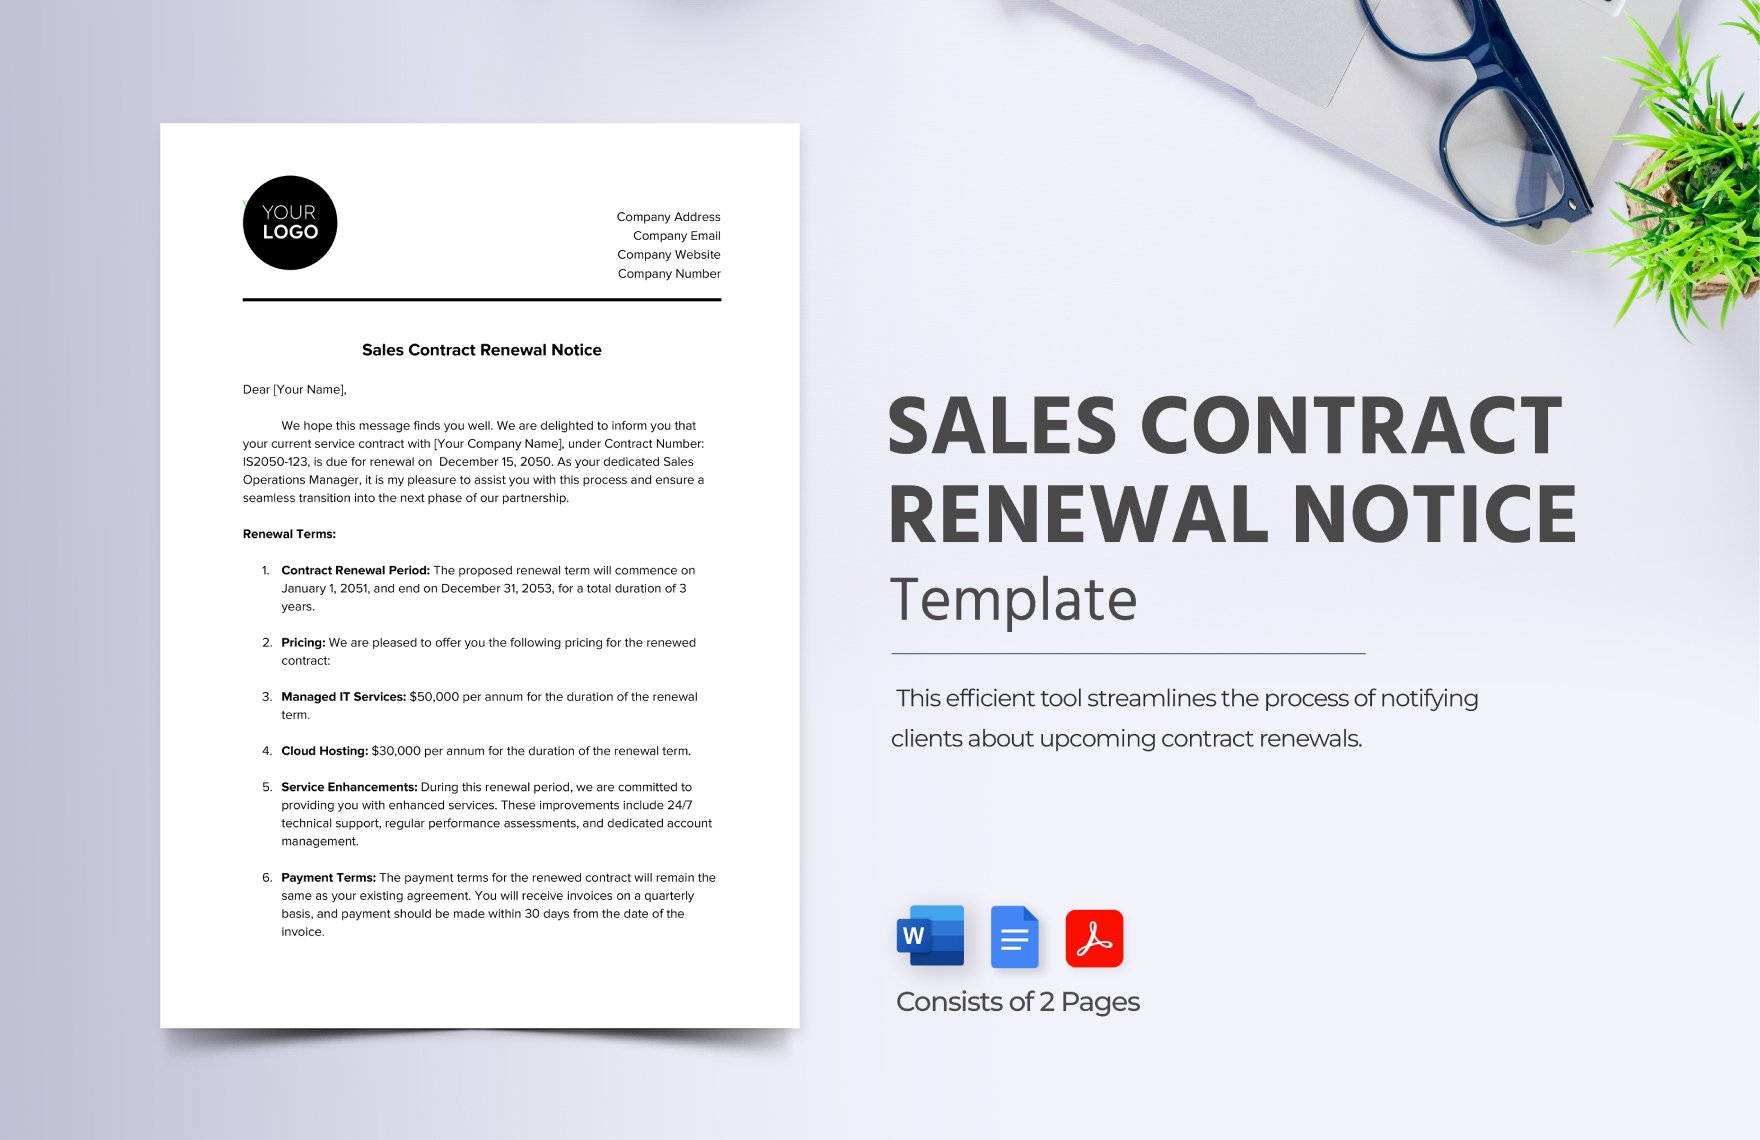 Sales Contract Renewal Notice Template in Word, Google Docs, PDF